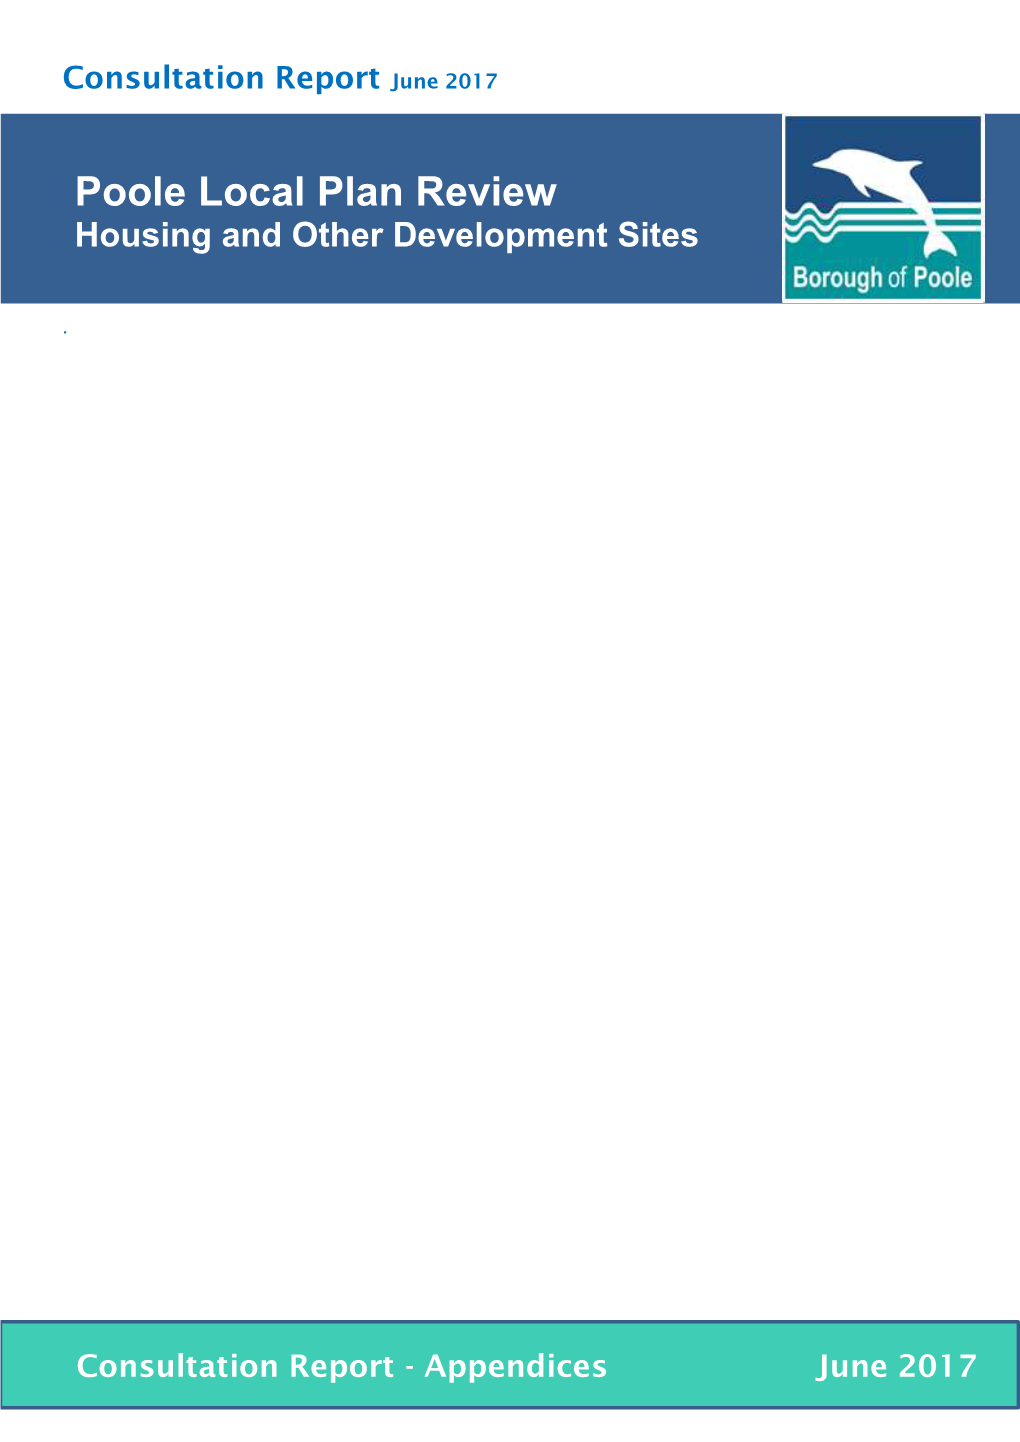 Poole Local Plan Review Housing and Other Development Sites